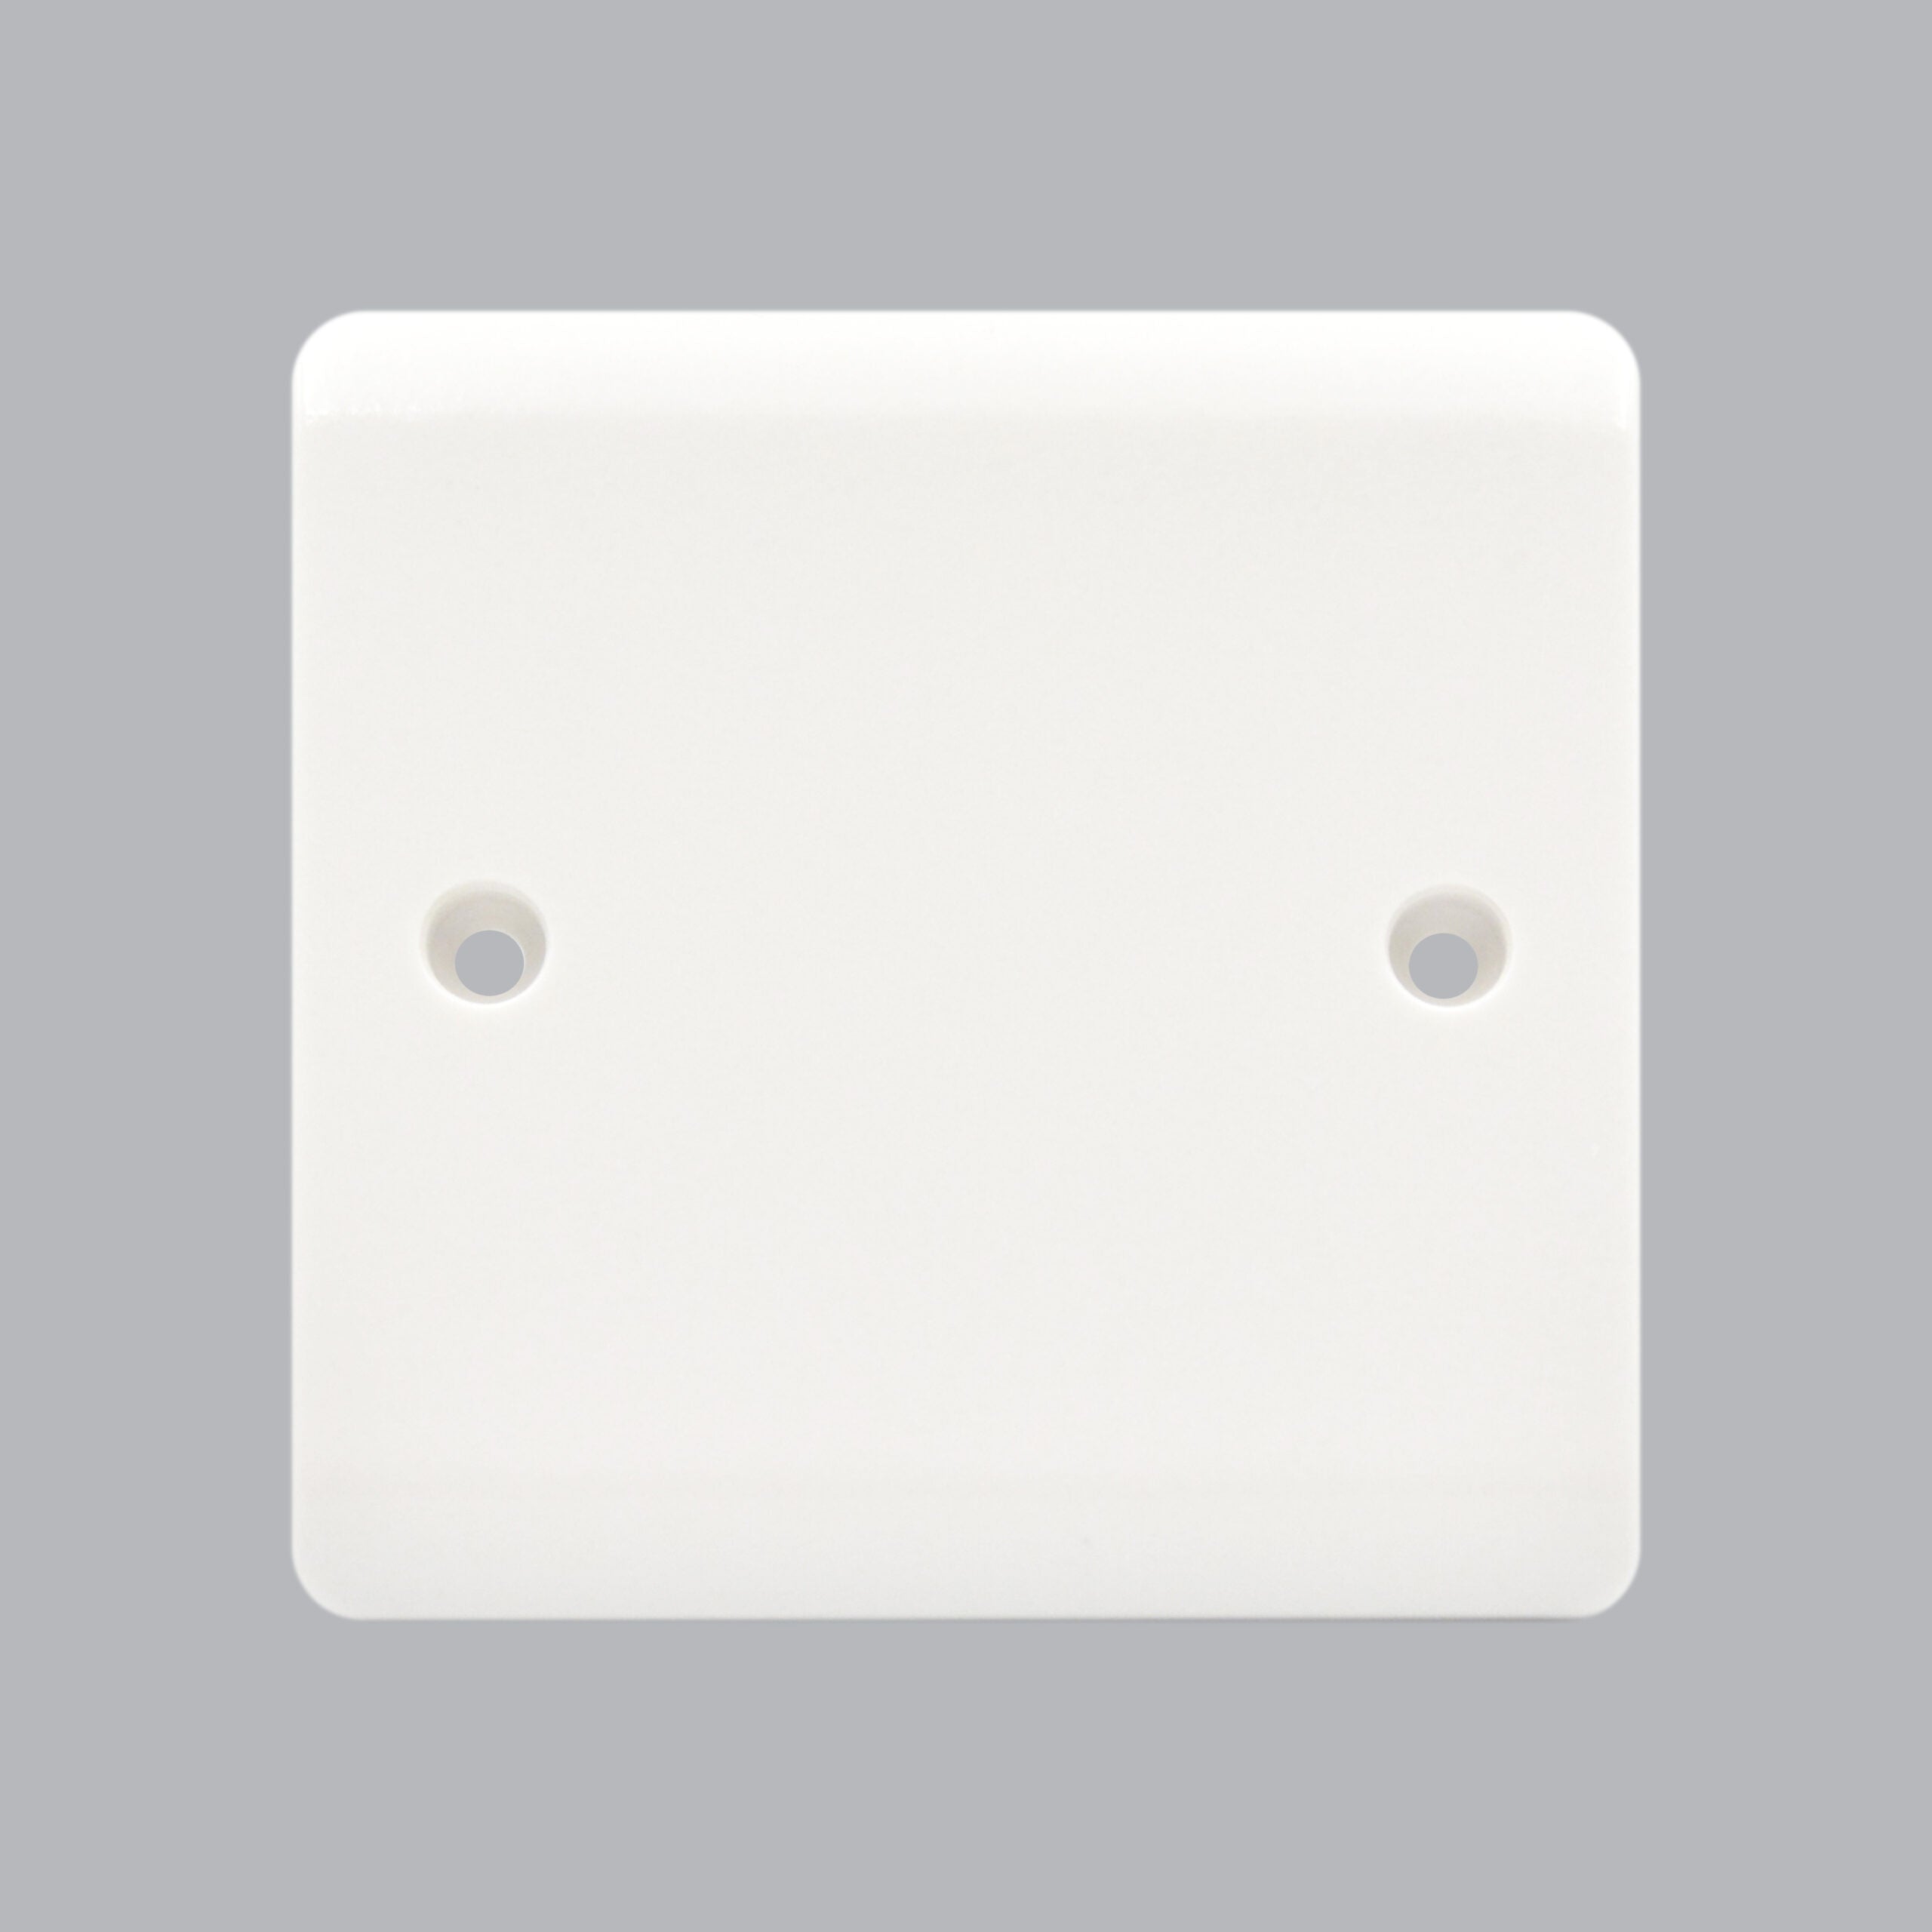 Blank Plate Cover | Supply Master Accra, Ghana - Tools Online Electrical Accessories 3x3 Buy Tools hardware Building materials